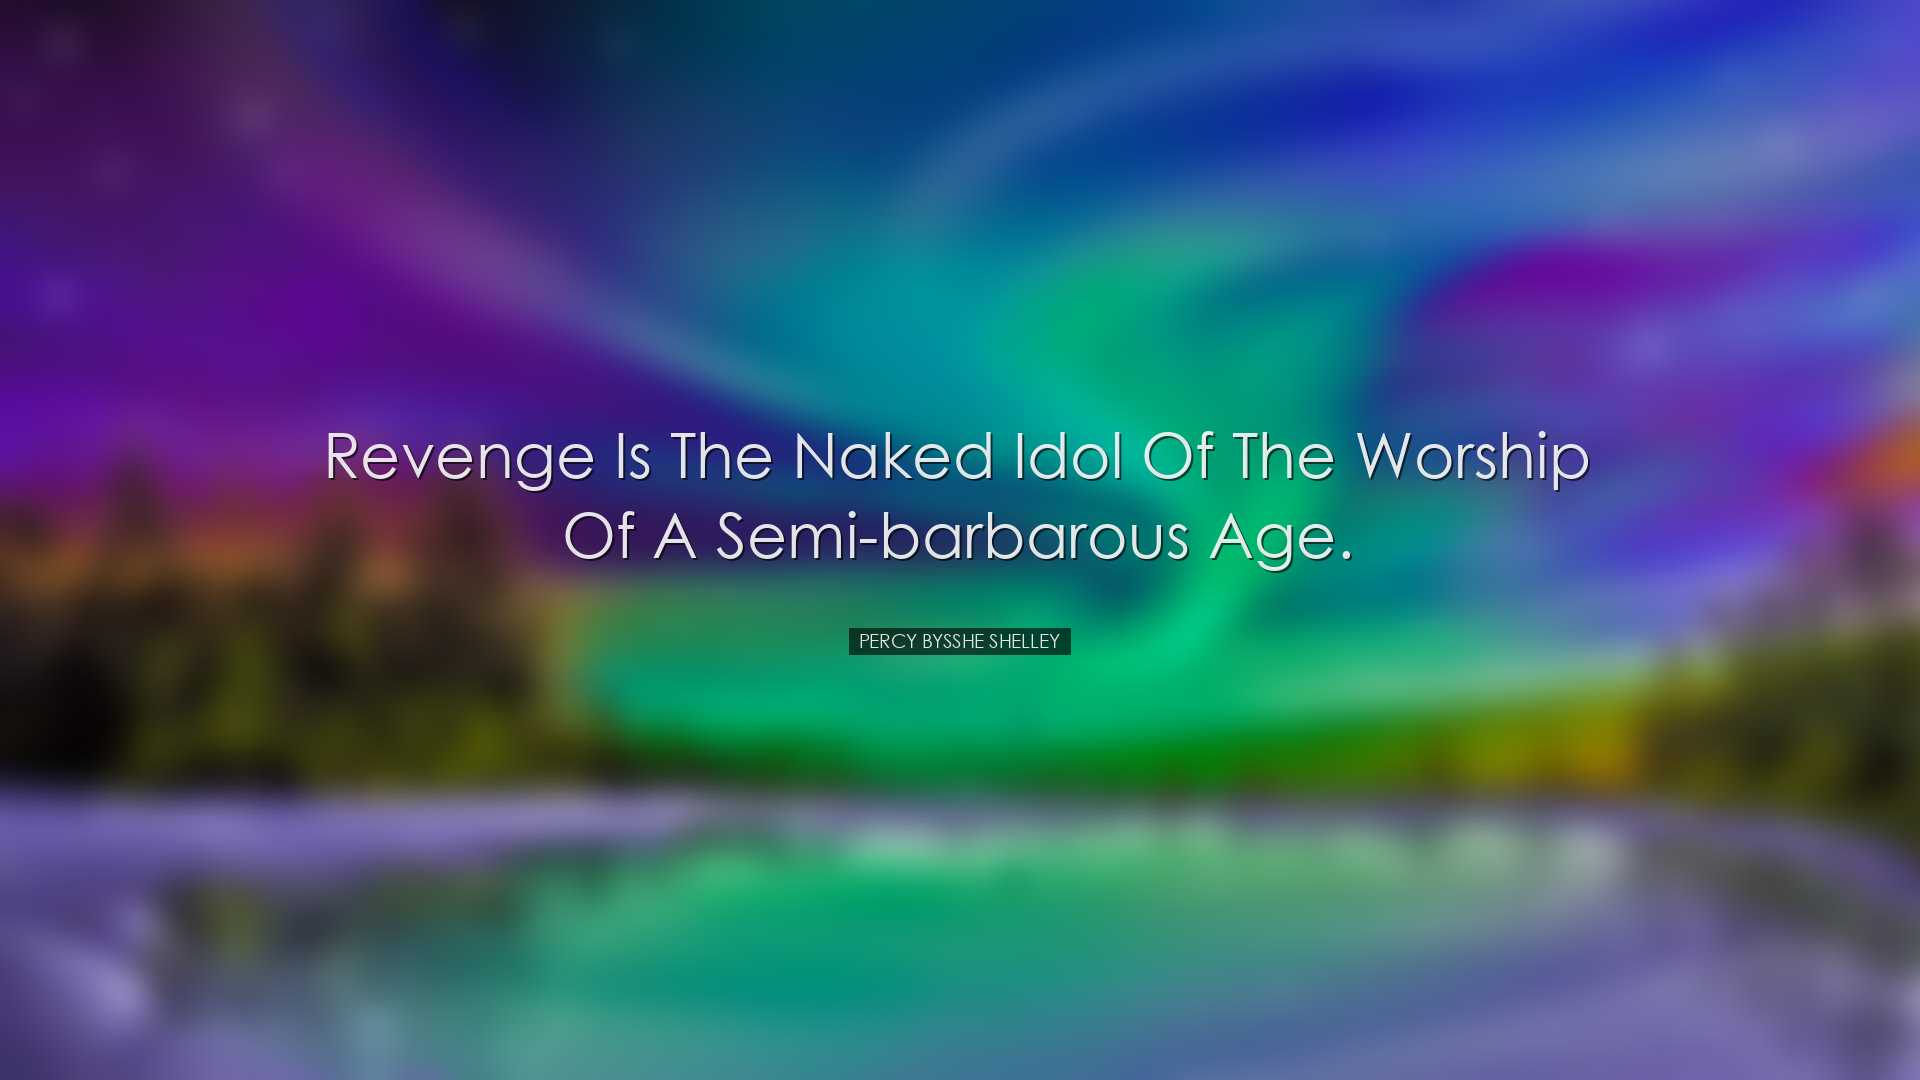 Revenge is the naked idol of the worship of a semi-barbarous age.